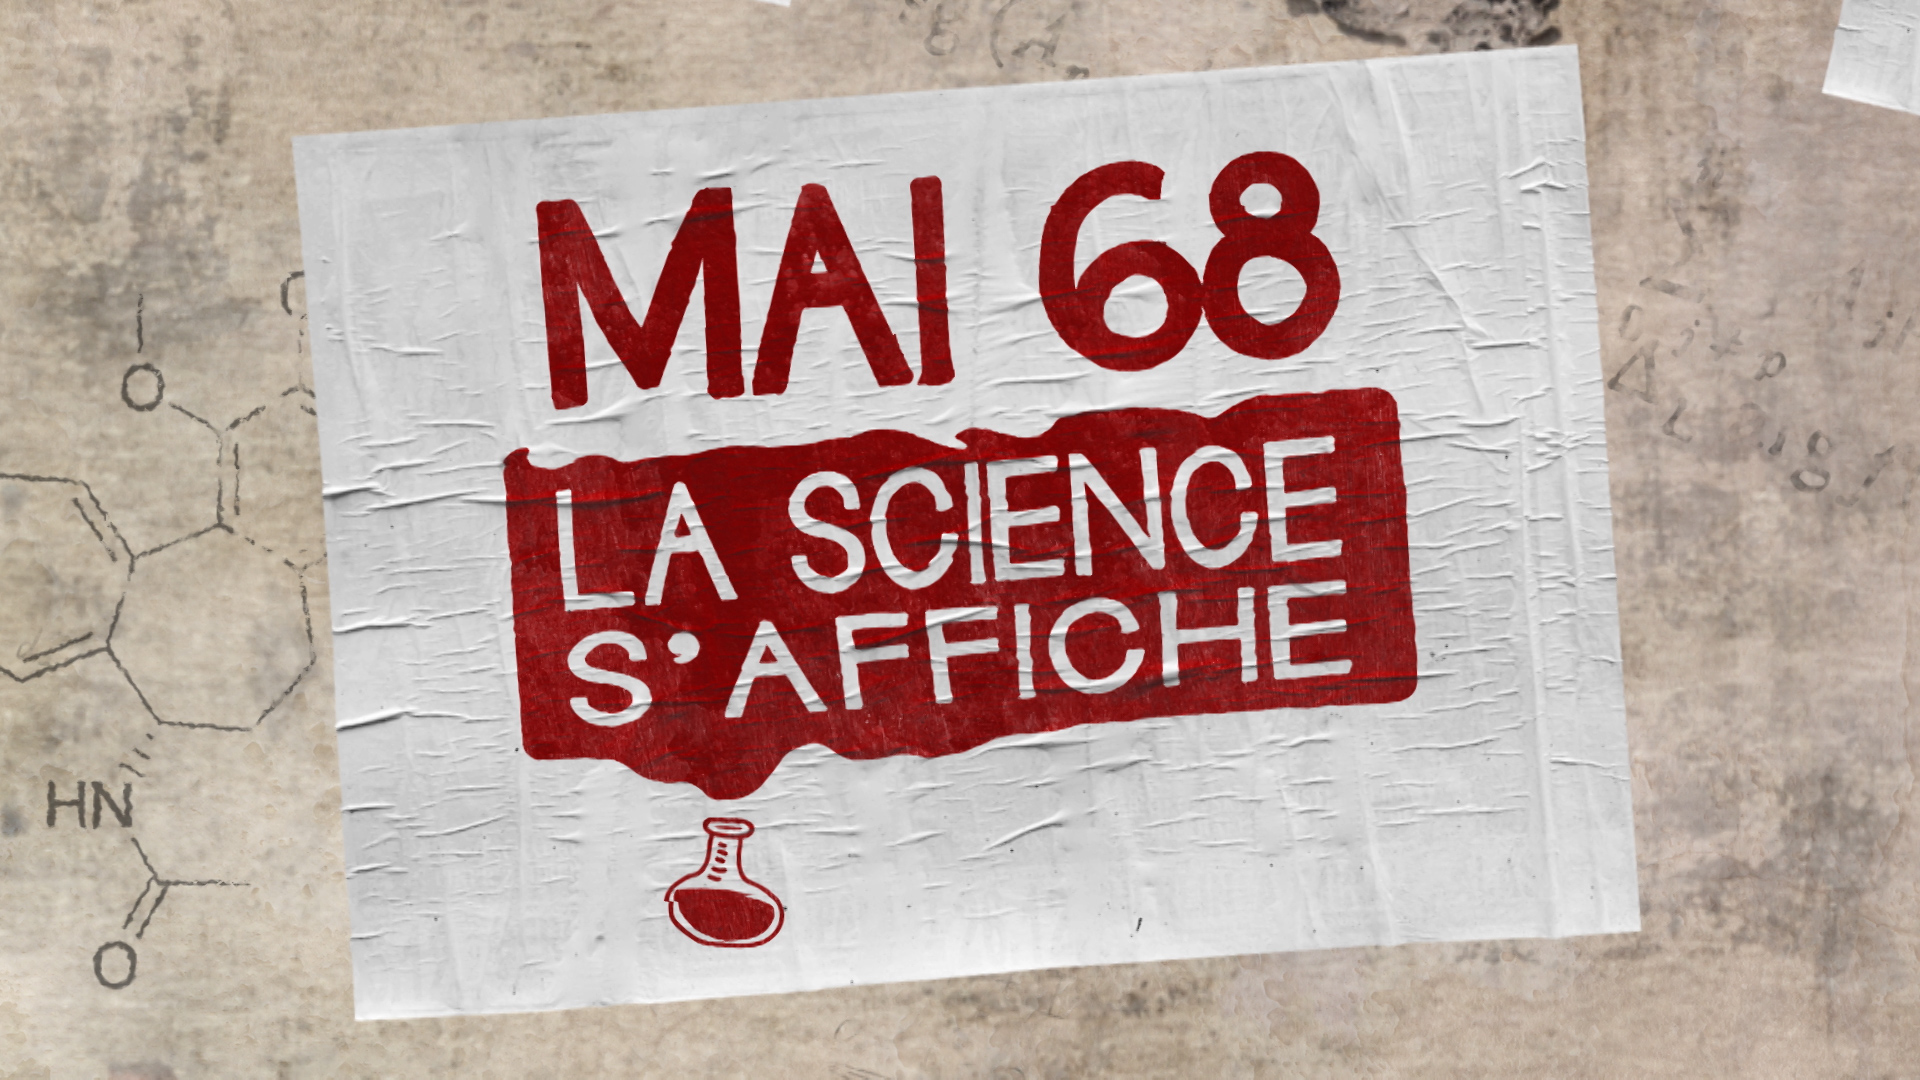 May ’68, Lived and Recounted by the French Scientific Community